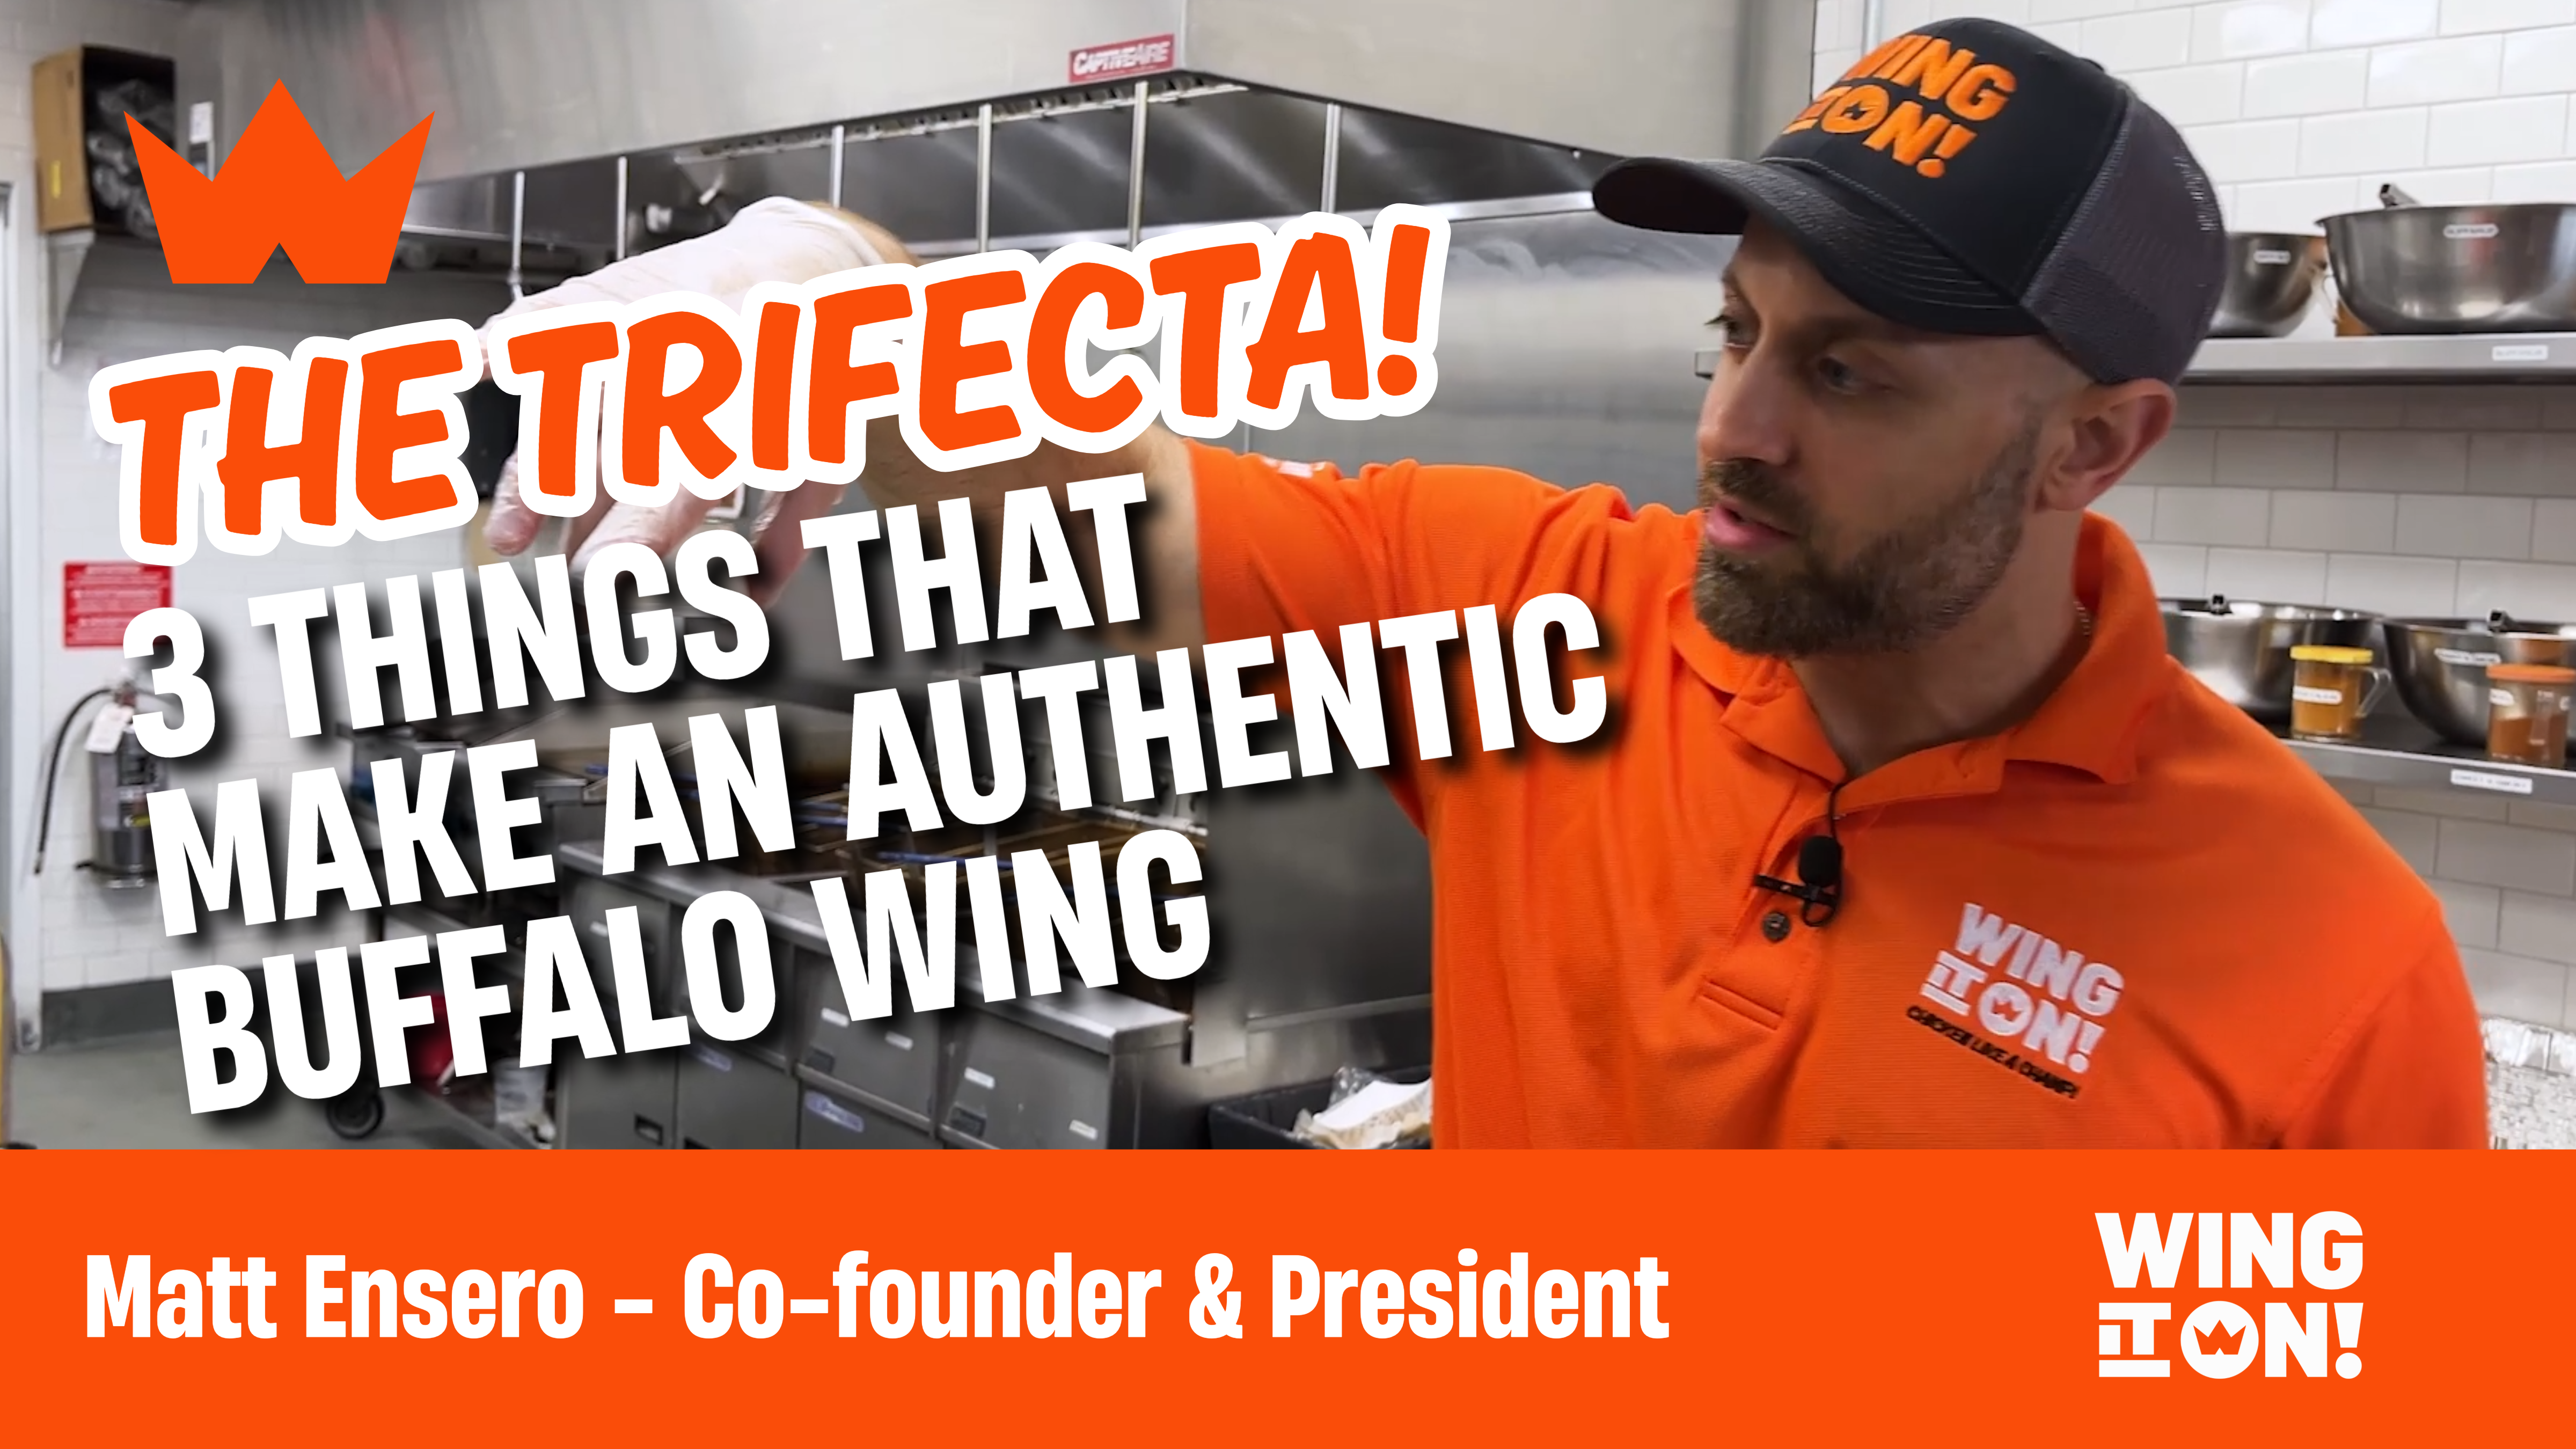 Wing It On!, Wings, Chicken Wings, Wing Experience, Buffalo Wings, Trifecta, Authentic Buffalo Wing Experience, Best Wing Experience, Wing Restaurant, Wing Spot, Buffalo Wings, Wing Food, Buffalo Sauce, Wing Franchise, Best Wings